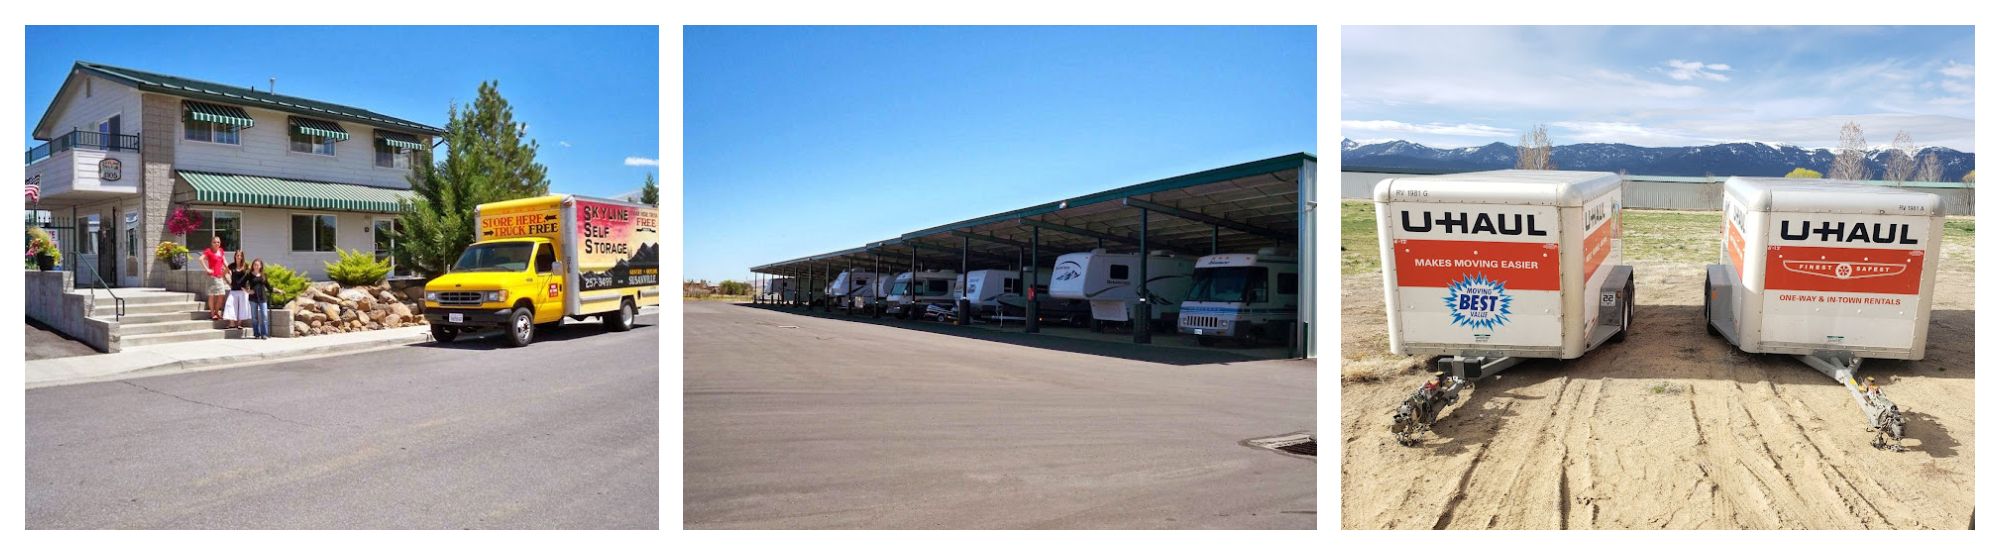 self storage, rv and boat parking, and u-haul rentals in susanville ca